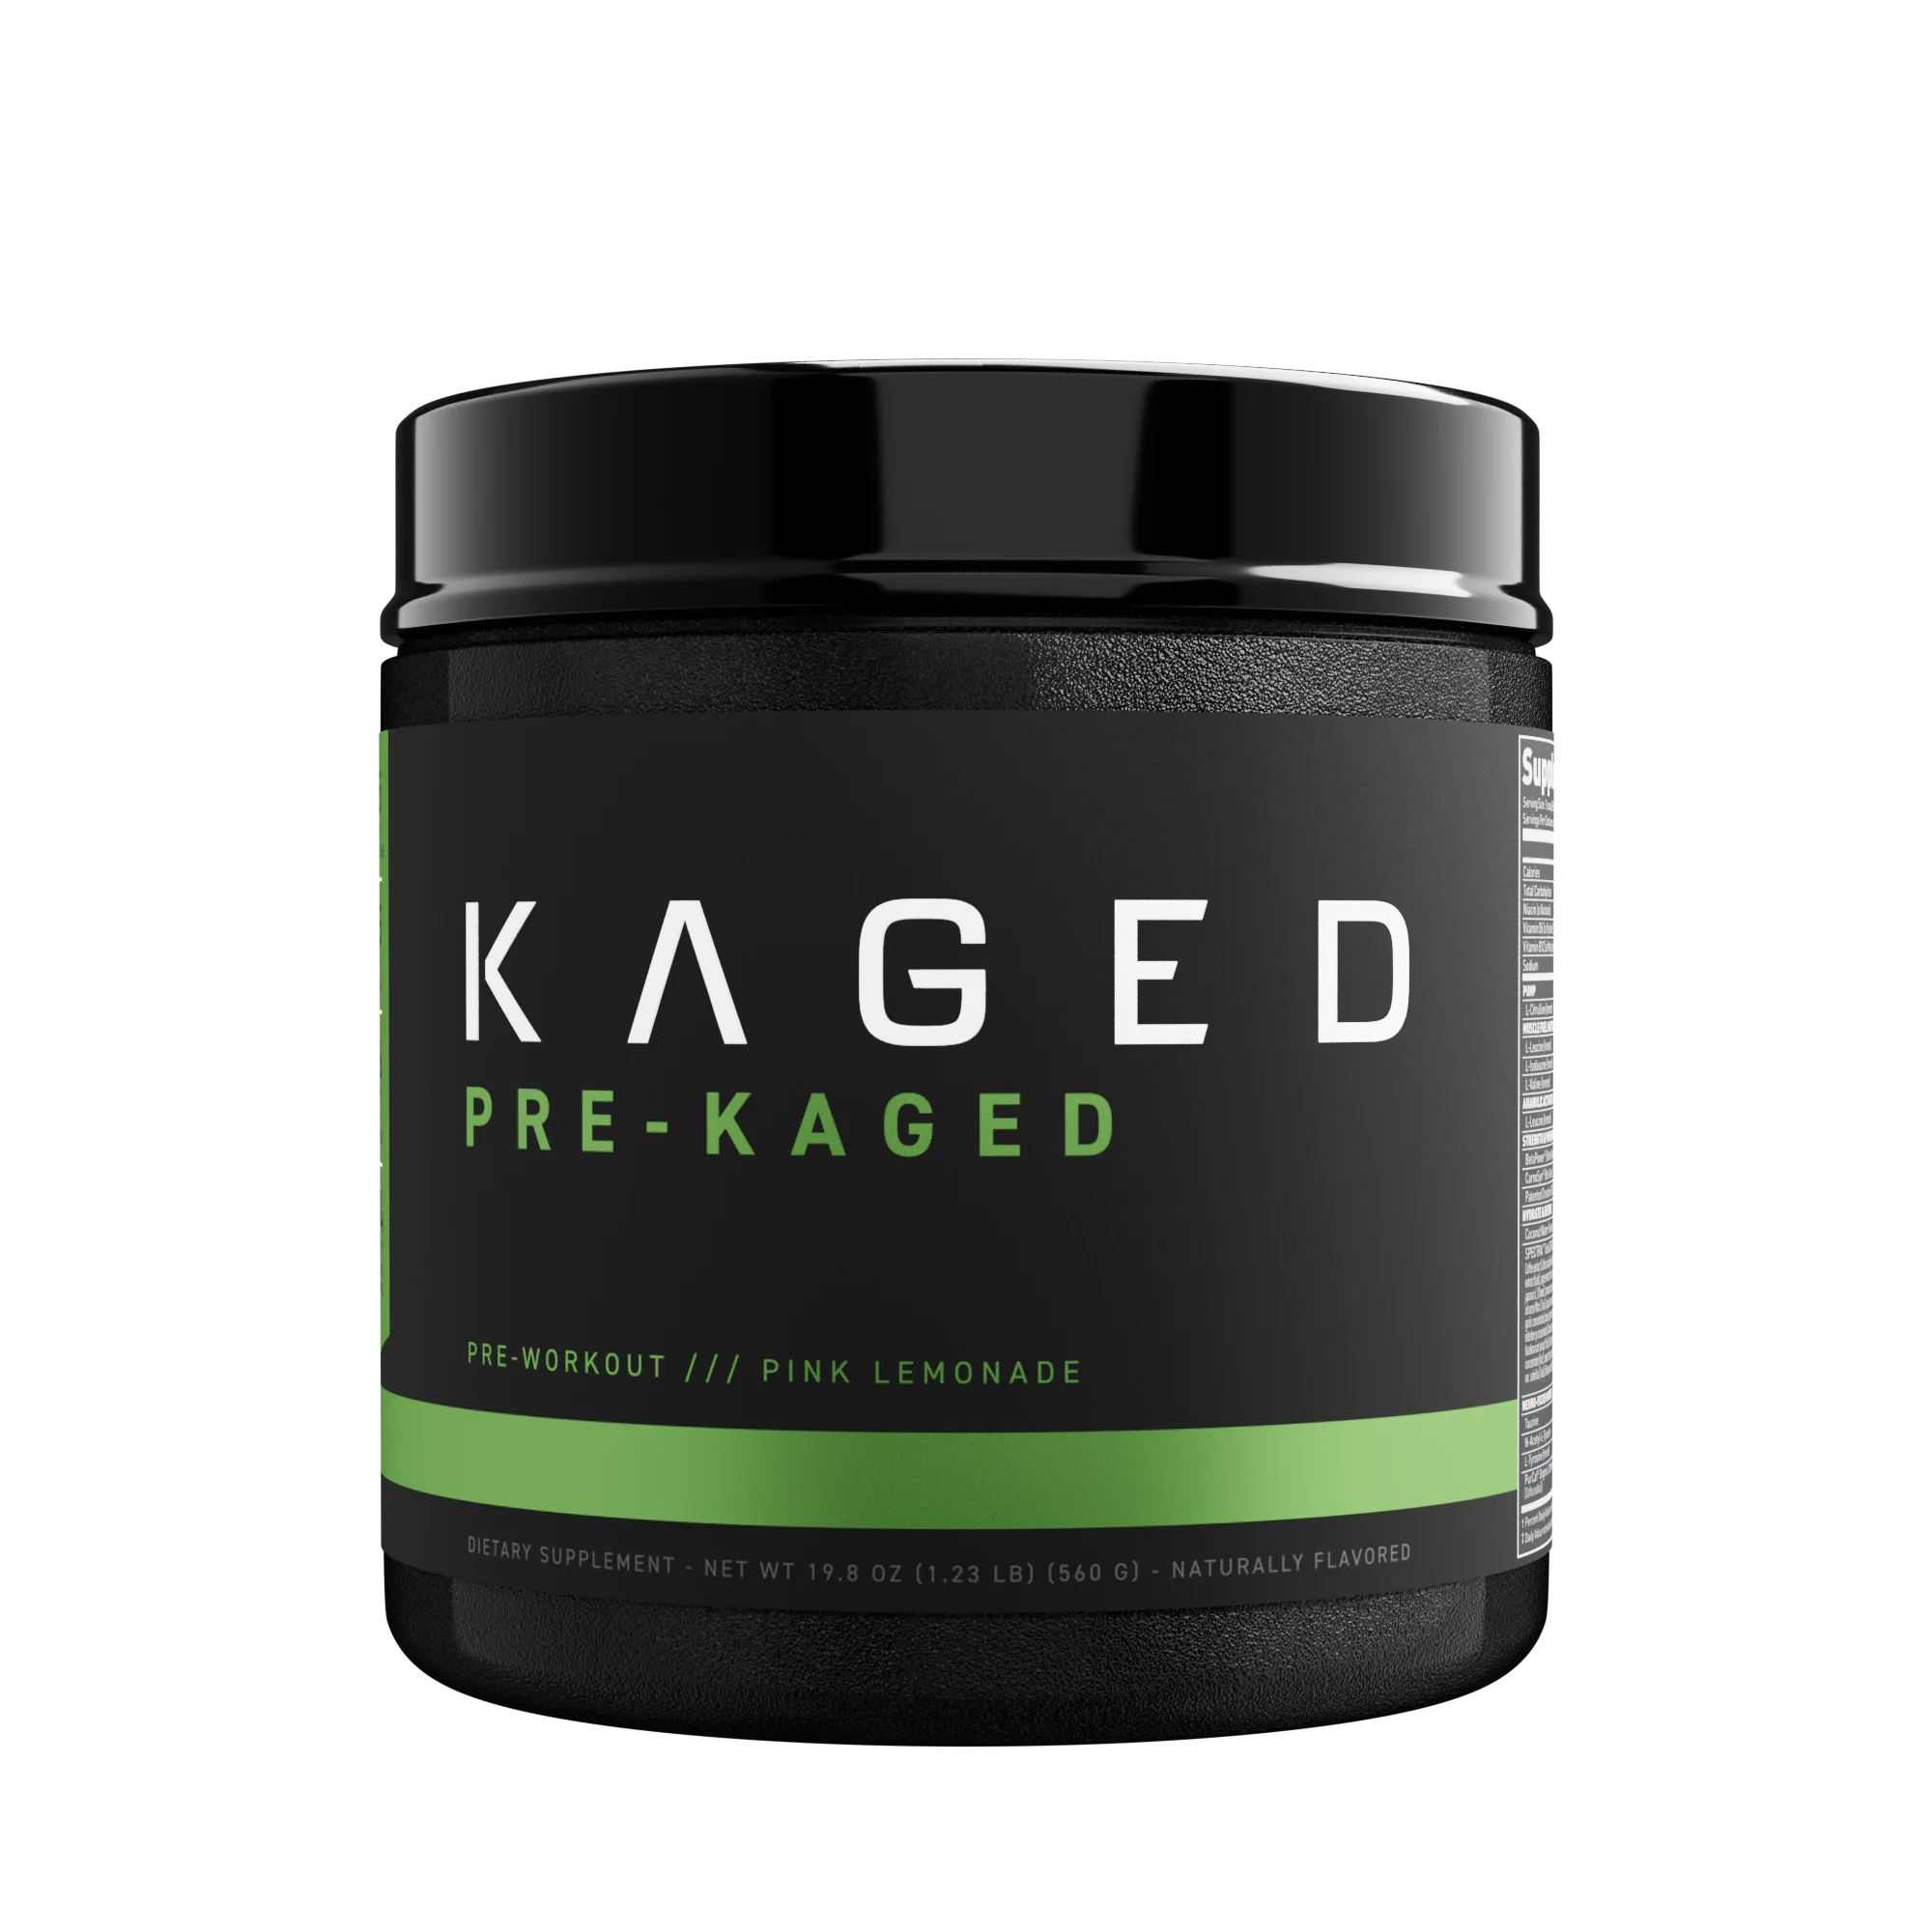 Kaged Pre Workout is the third best tasting pre workout